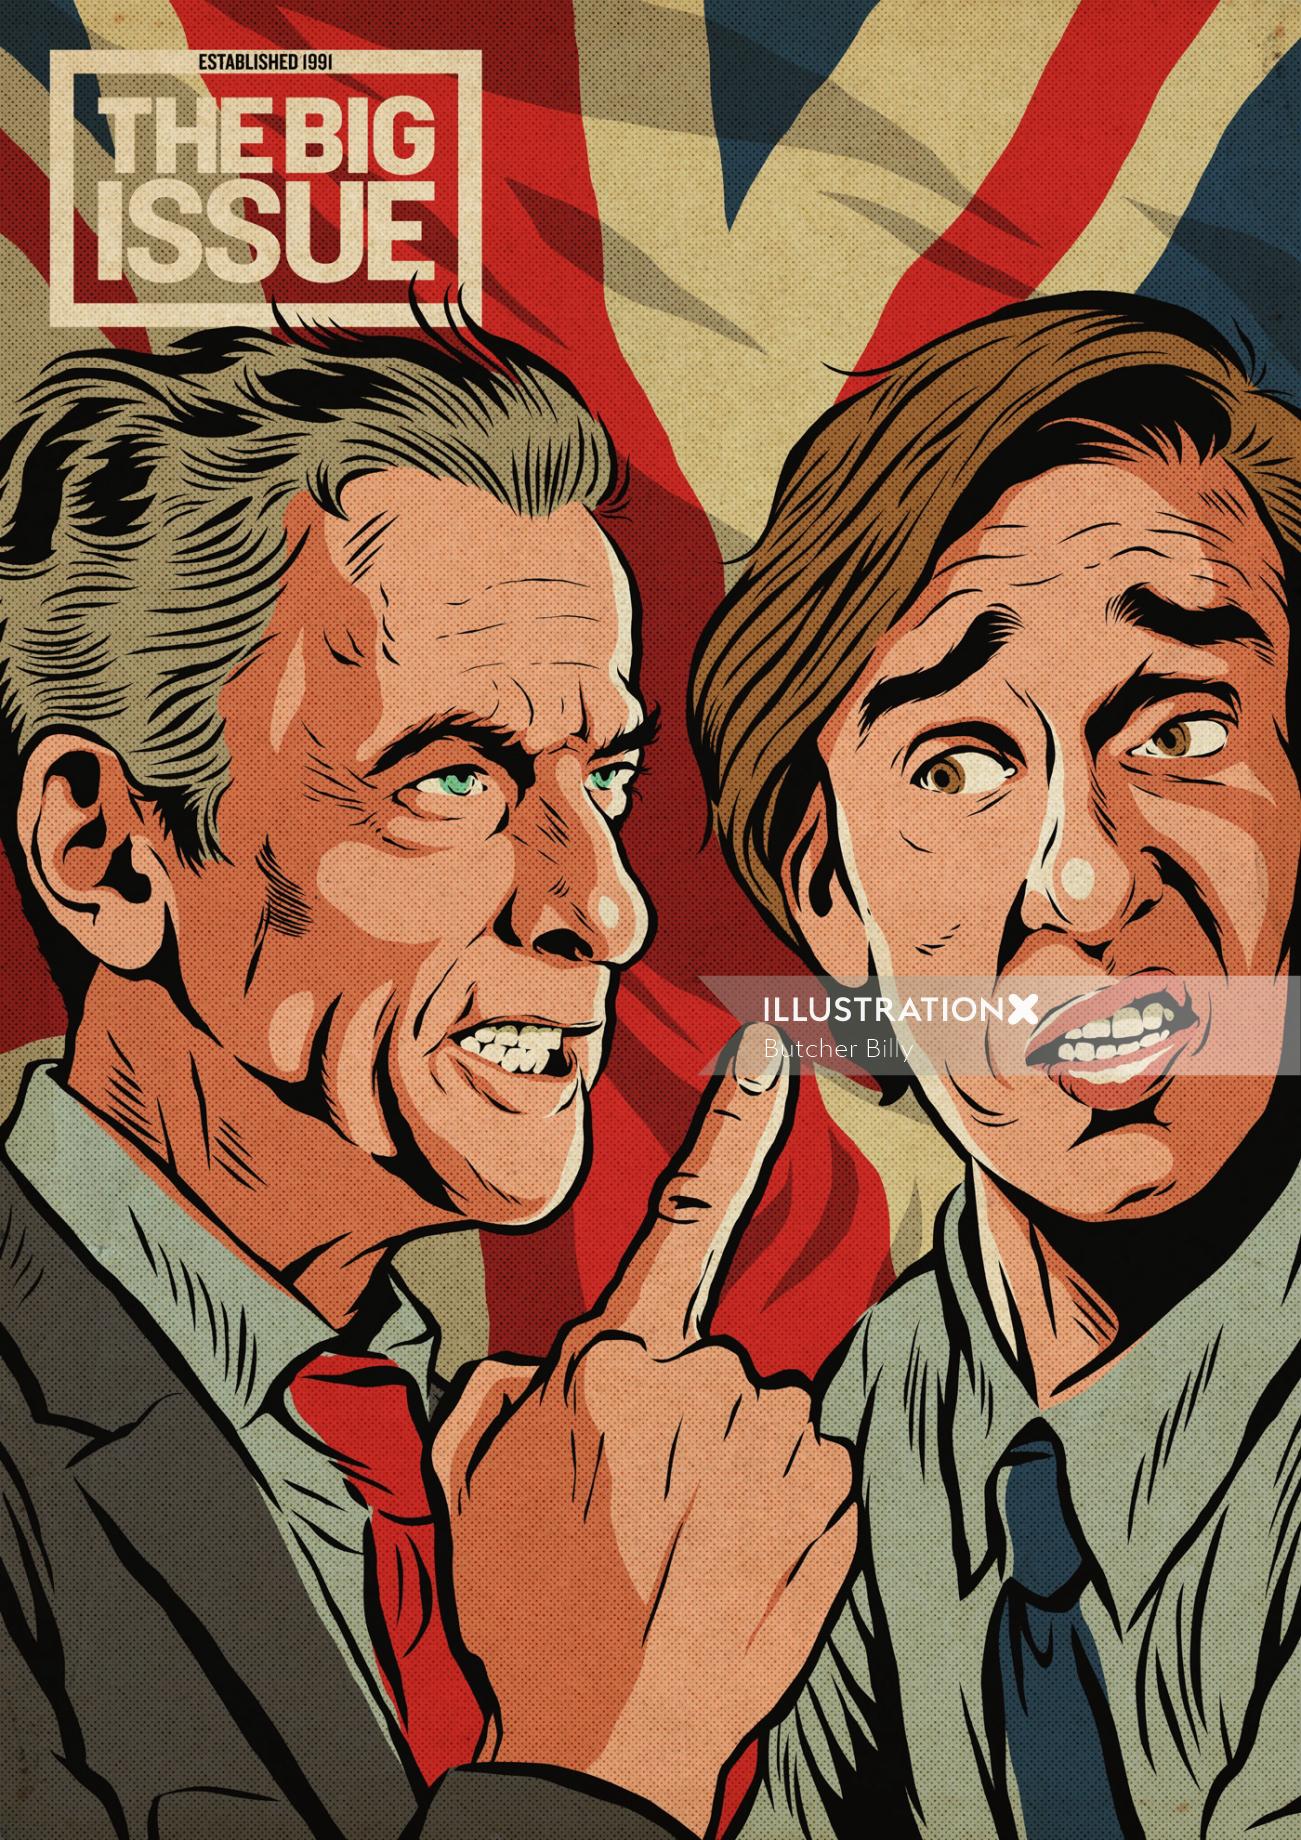 Cover illustration of Peter Capaldi & Steve Coogan for The Big Issue magazine